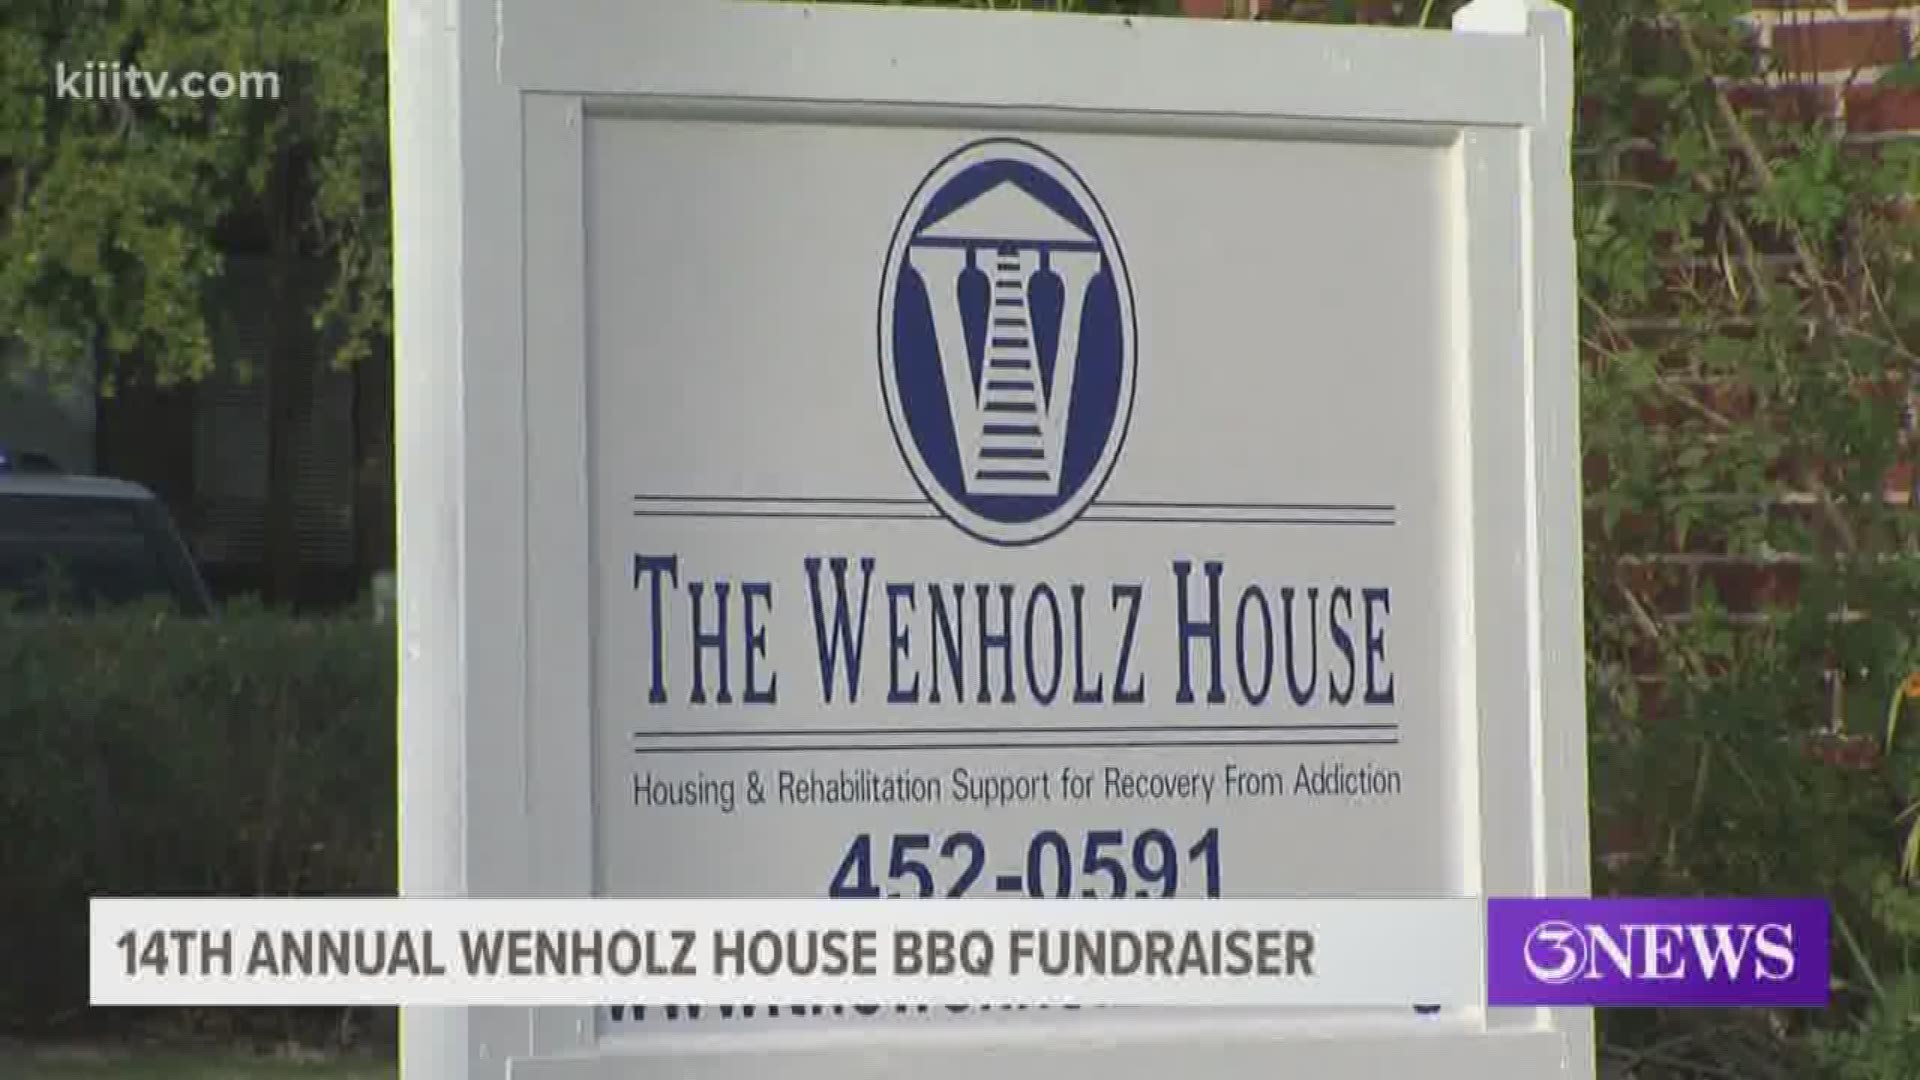 The Wenholz House, a non-profit agency that helps people battle alcohol addiction, is holding a barbecue fundraiser this weekend.